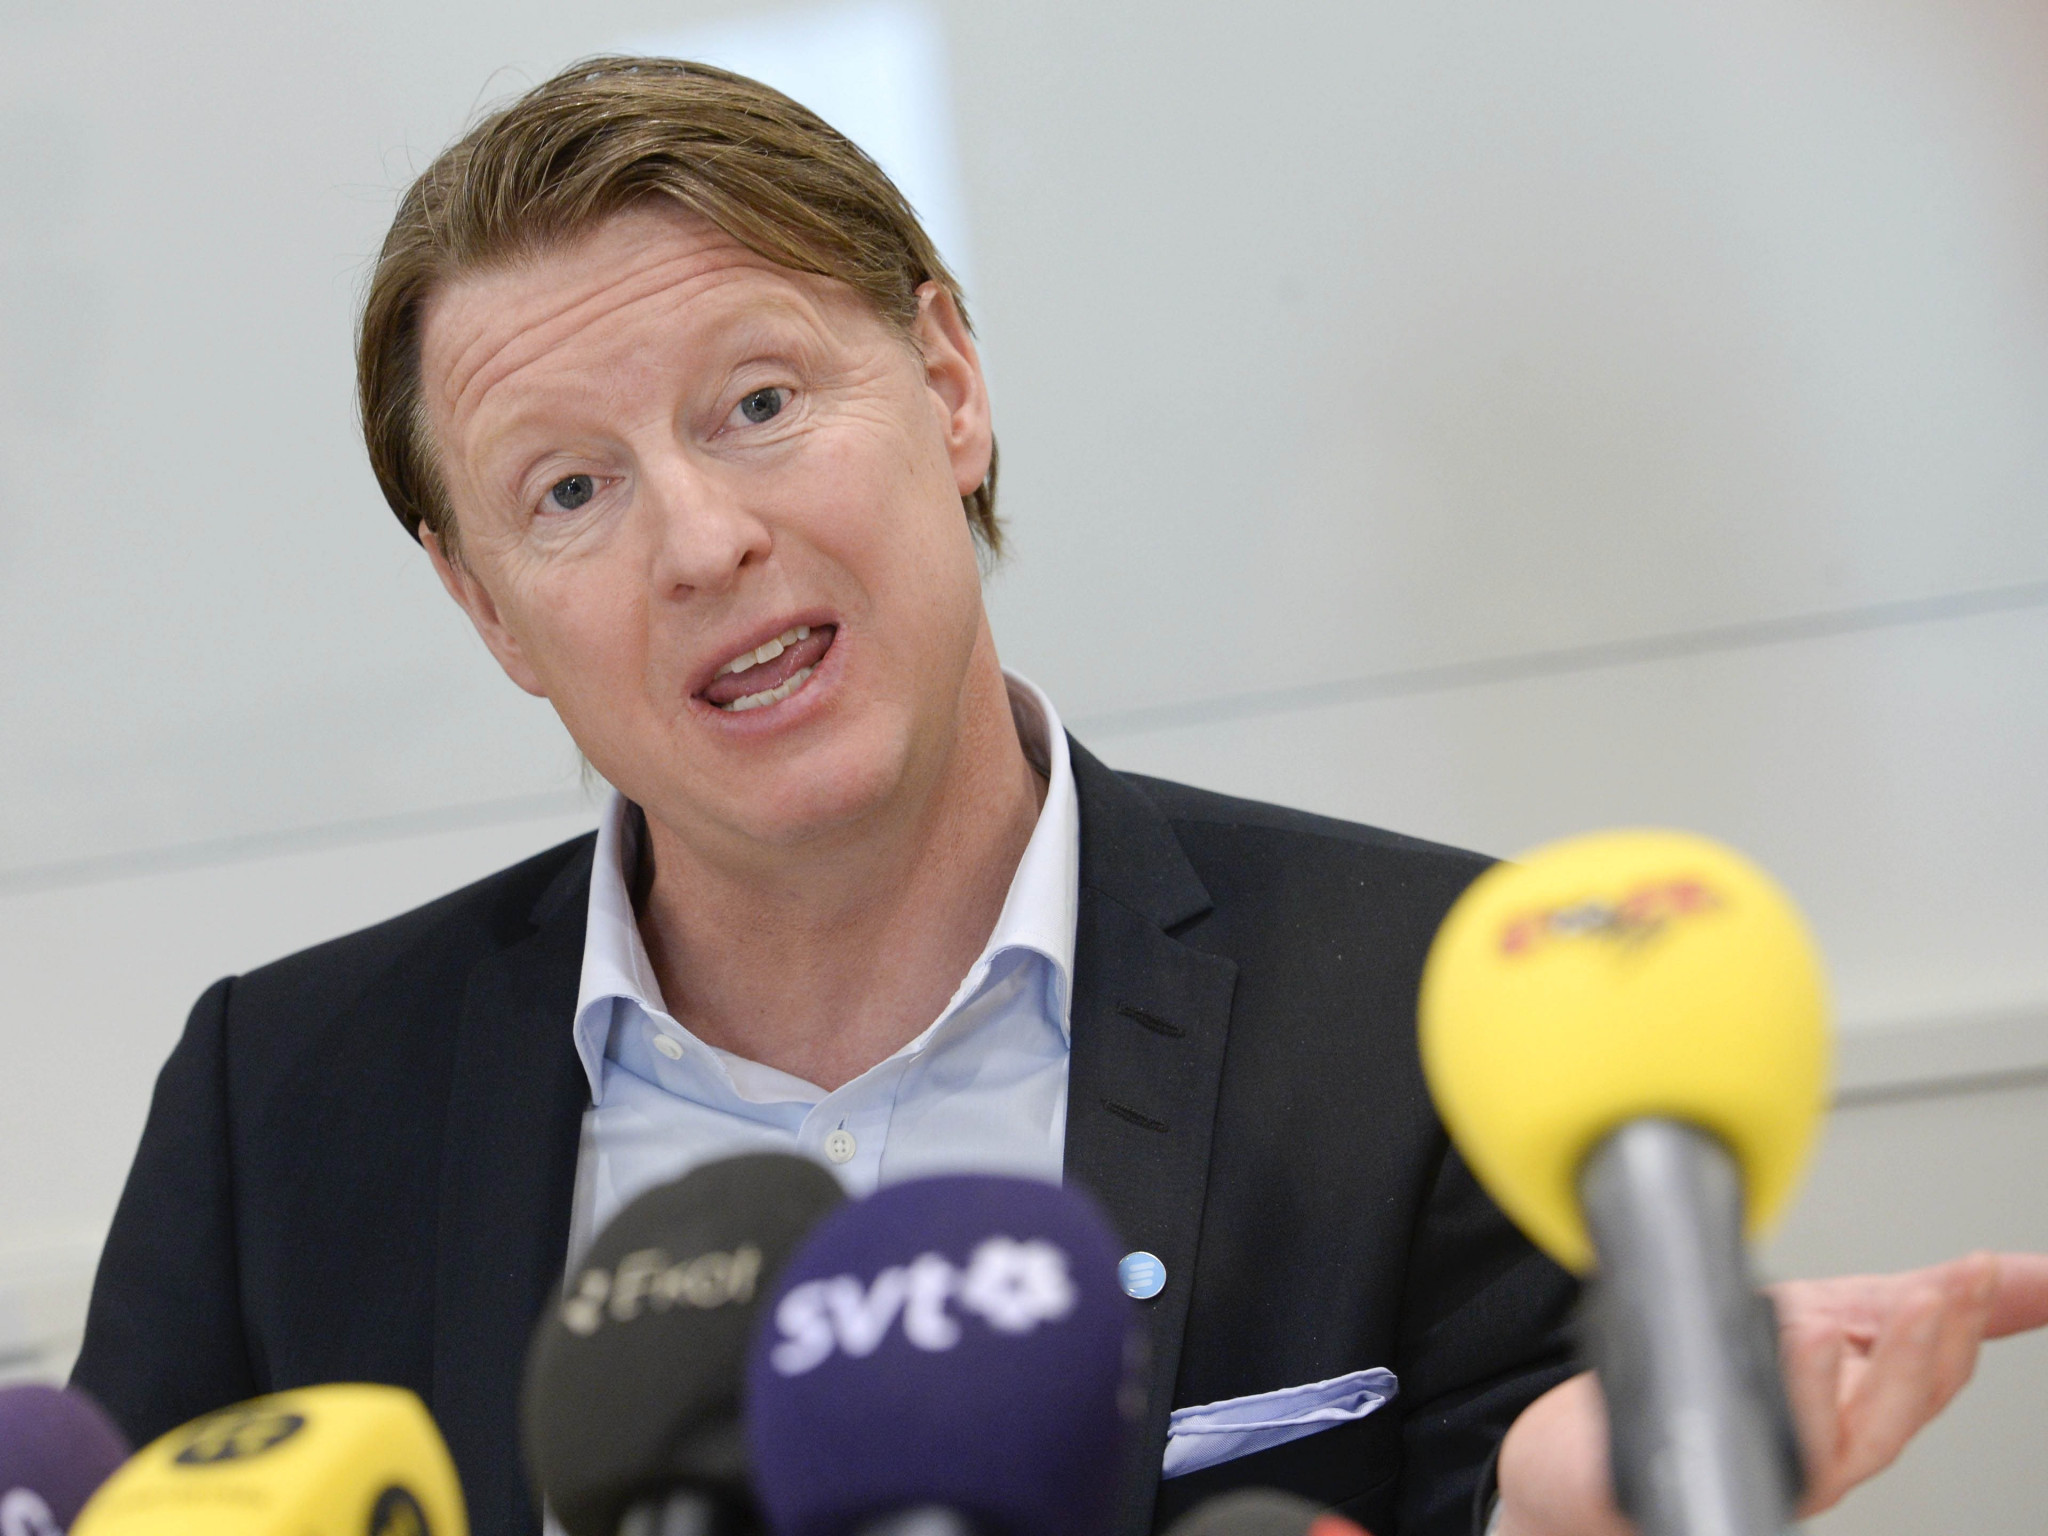 Mats Årjes will replace Hans Vestberg, pictured, as SOK President ©Getty Images